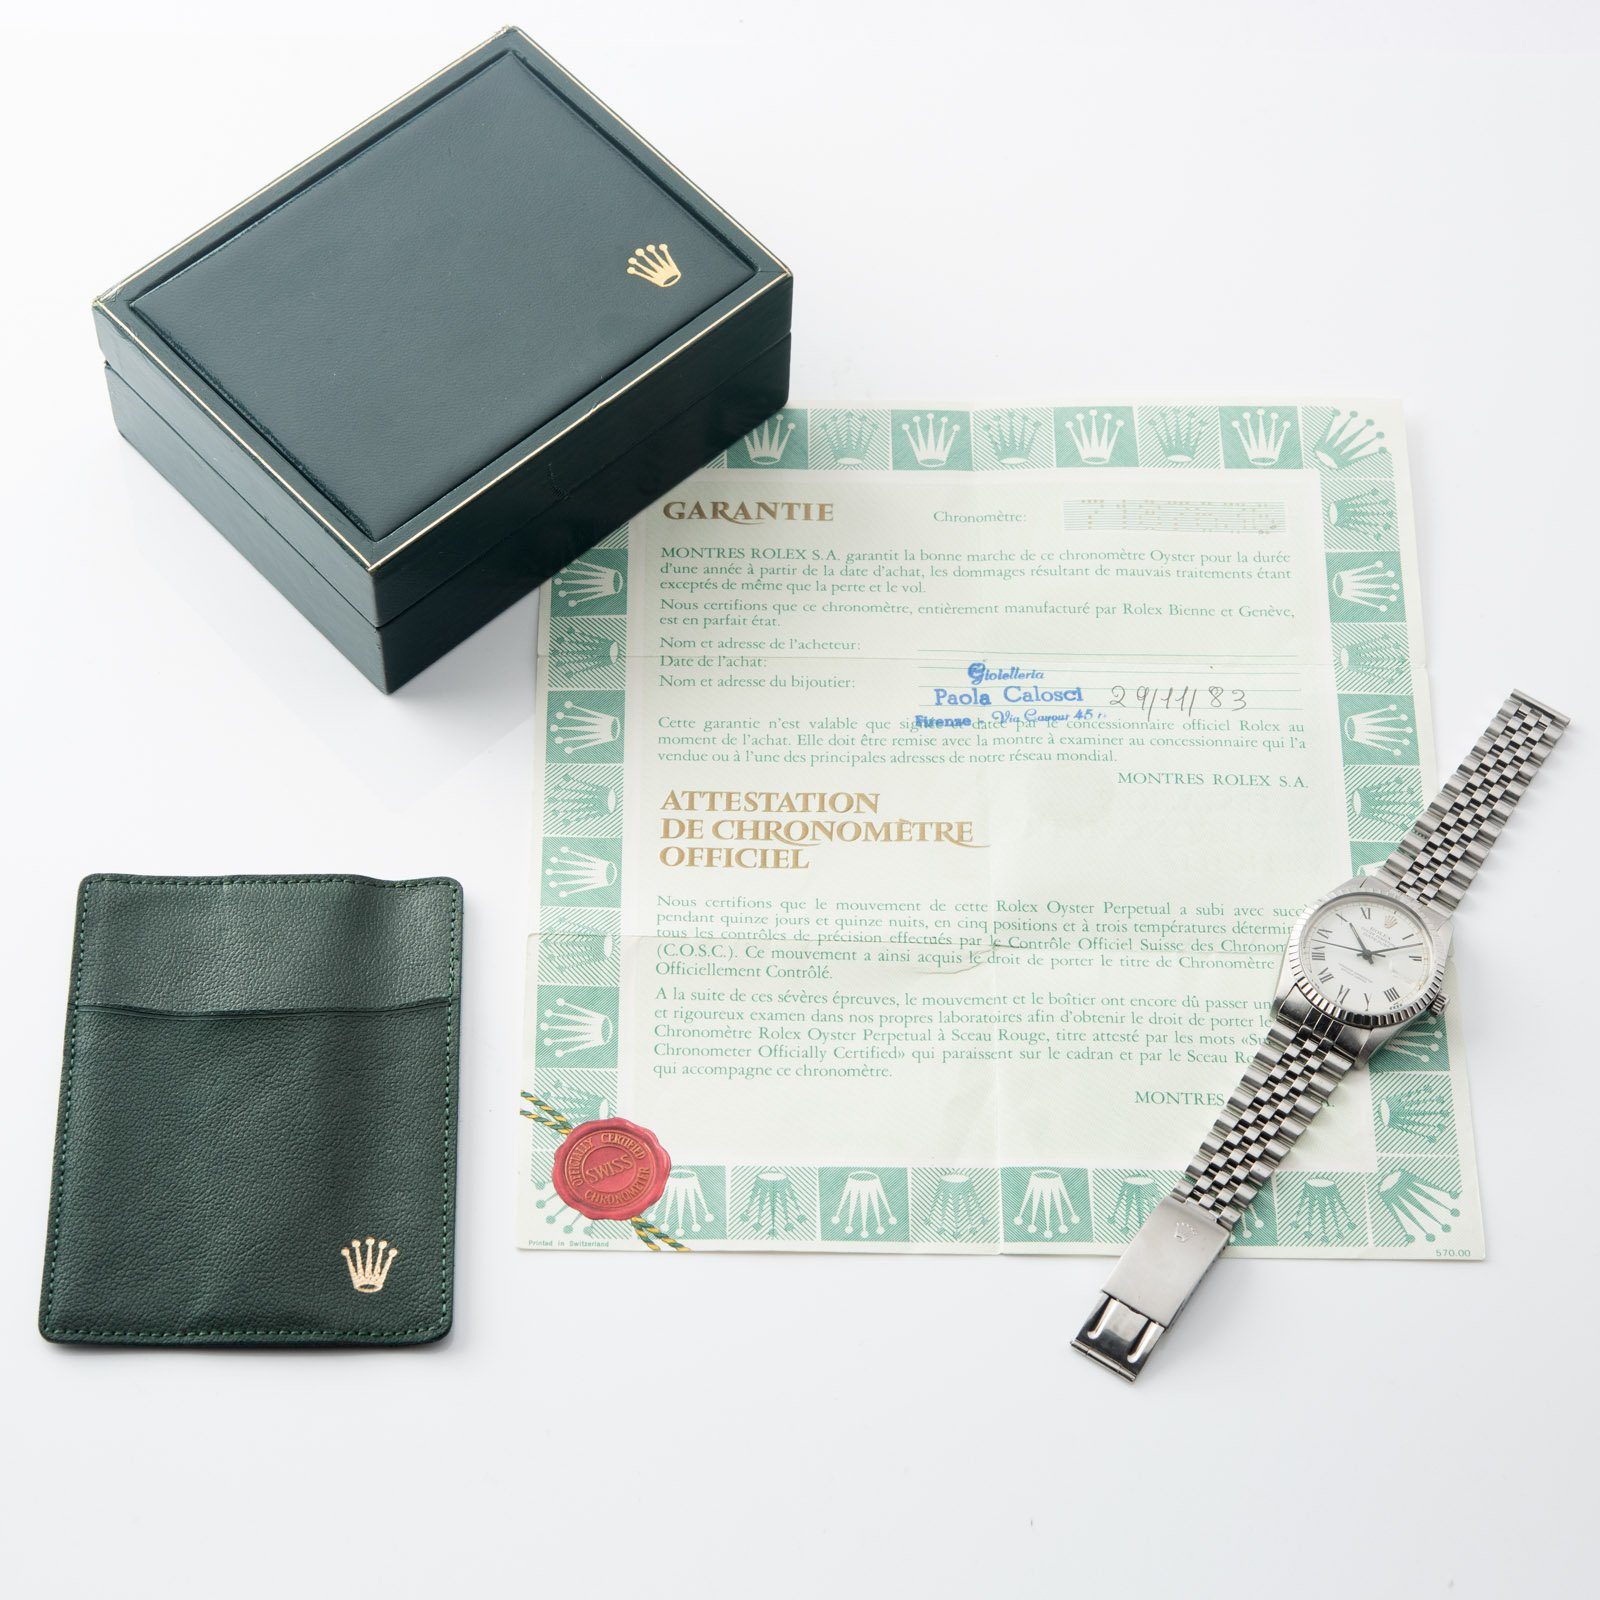 Rolex Datejust Reference 16030 White Buckley Dial Box and Papers